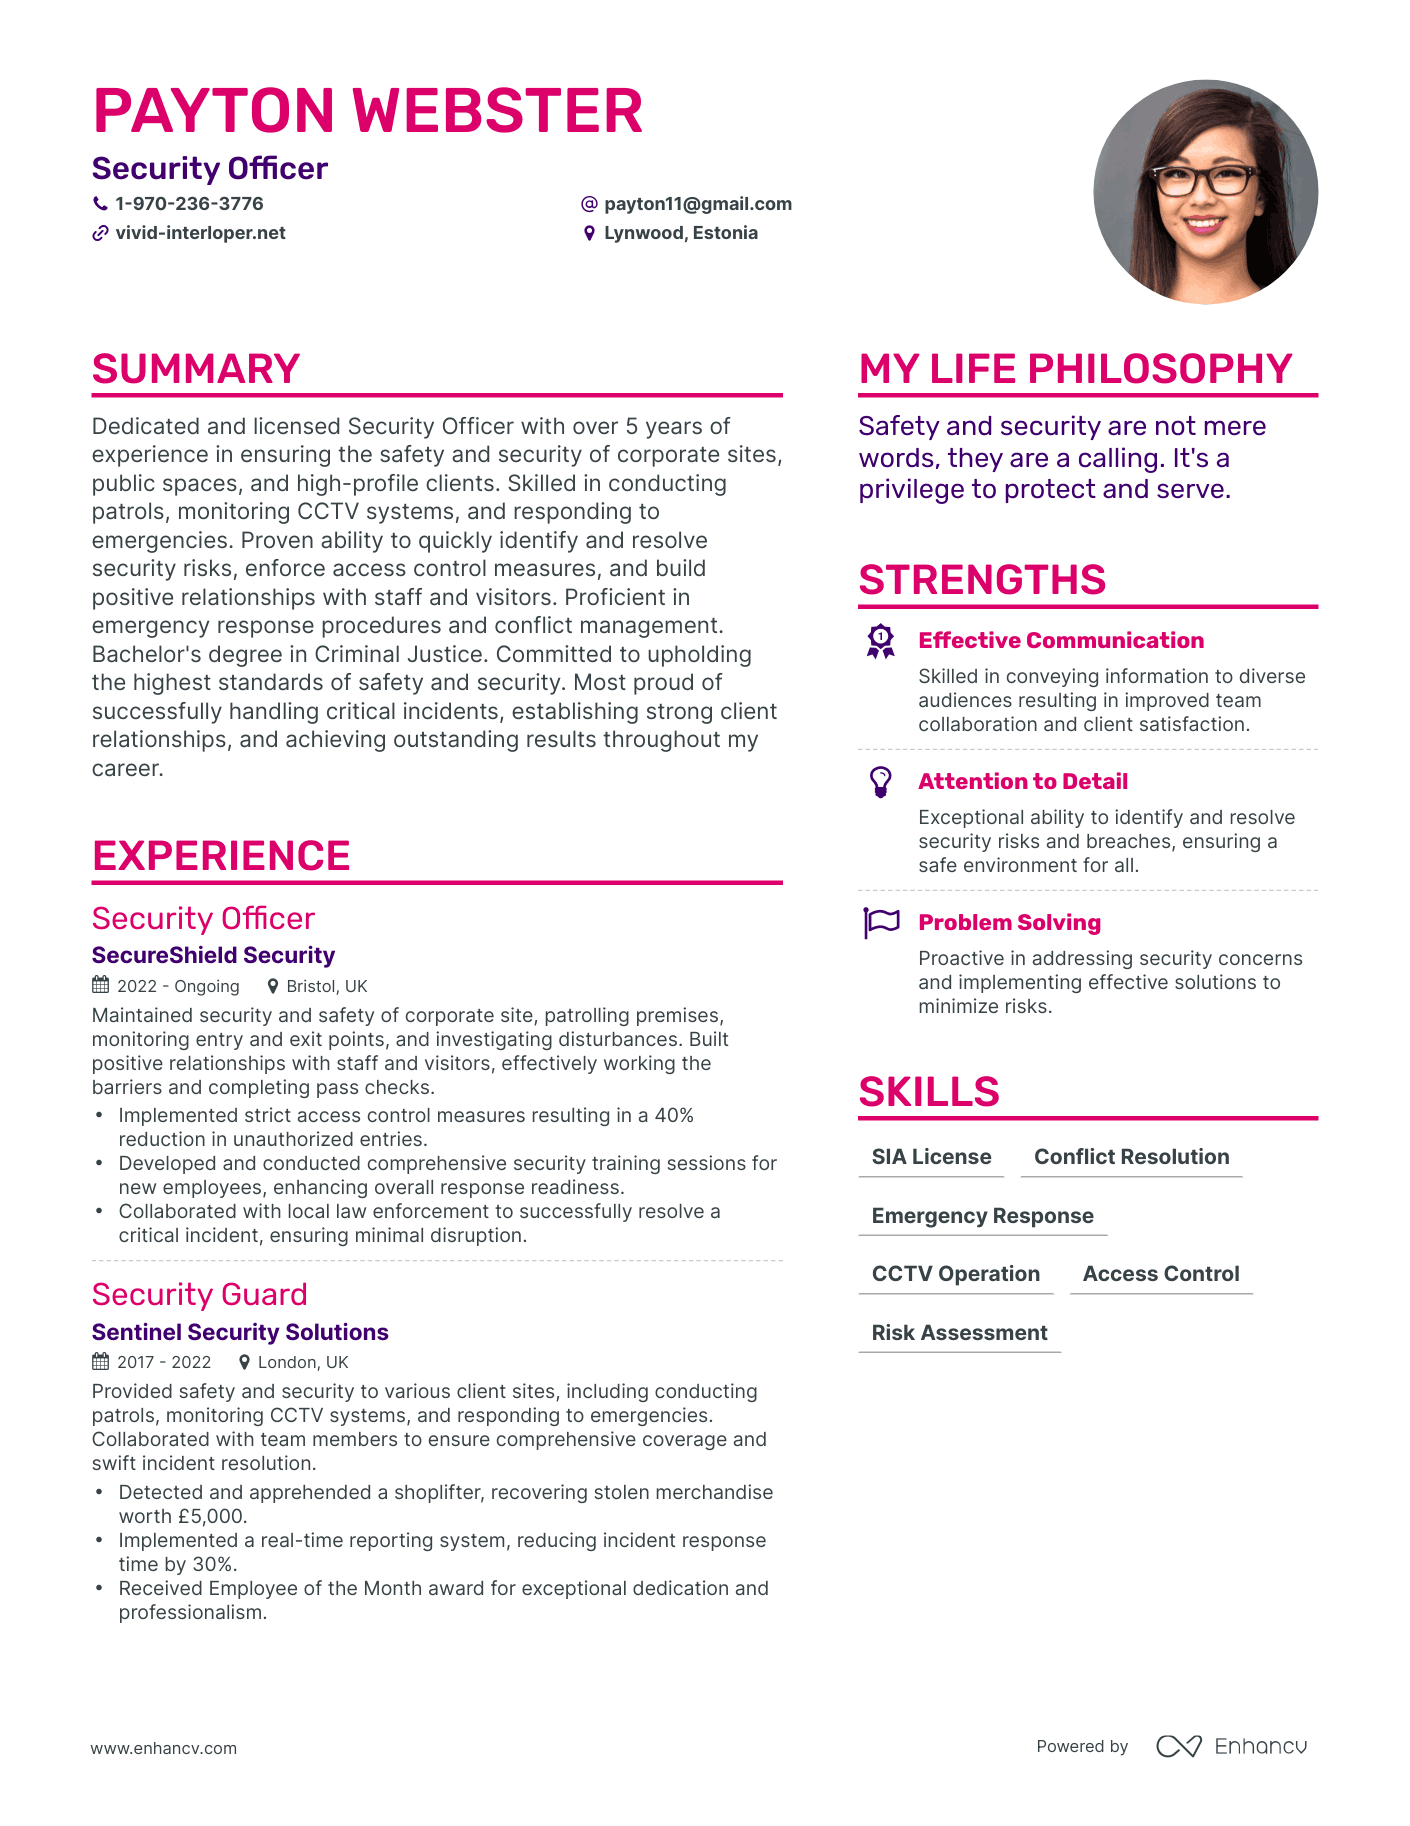 Security Officer resume example